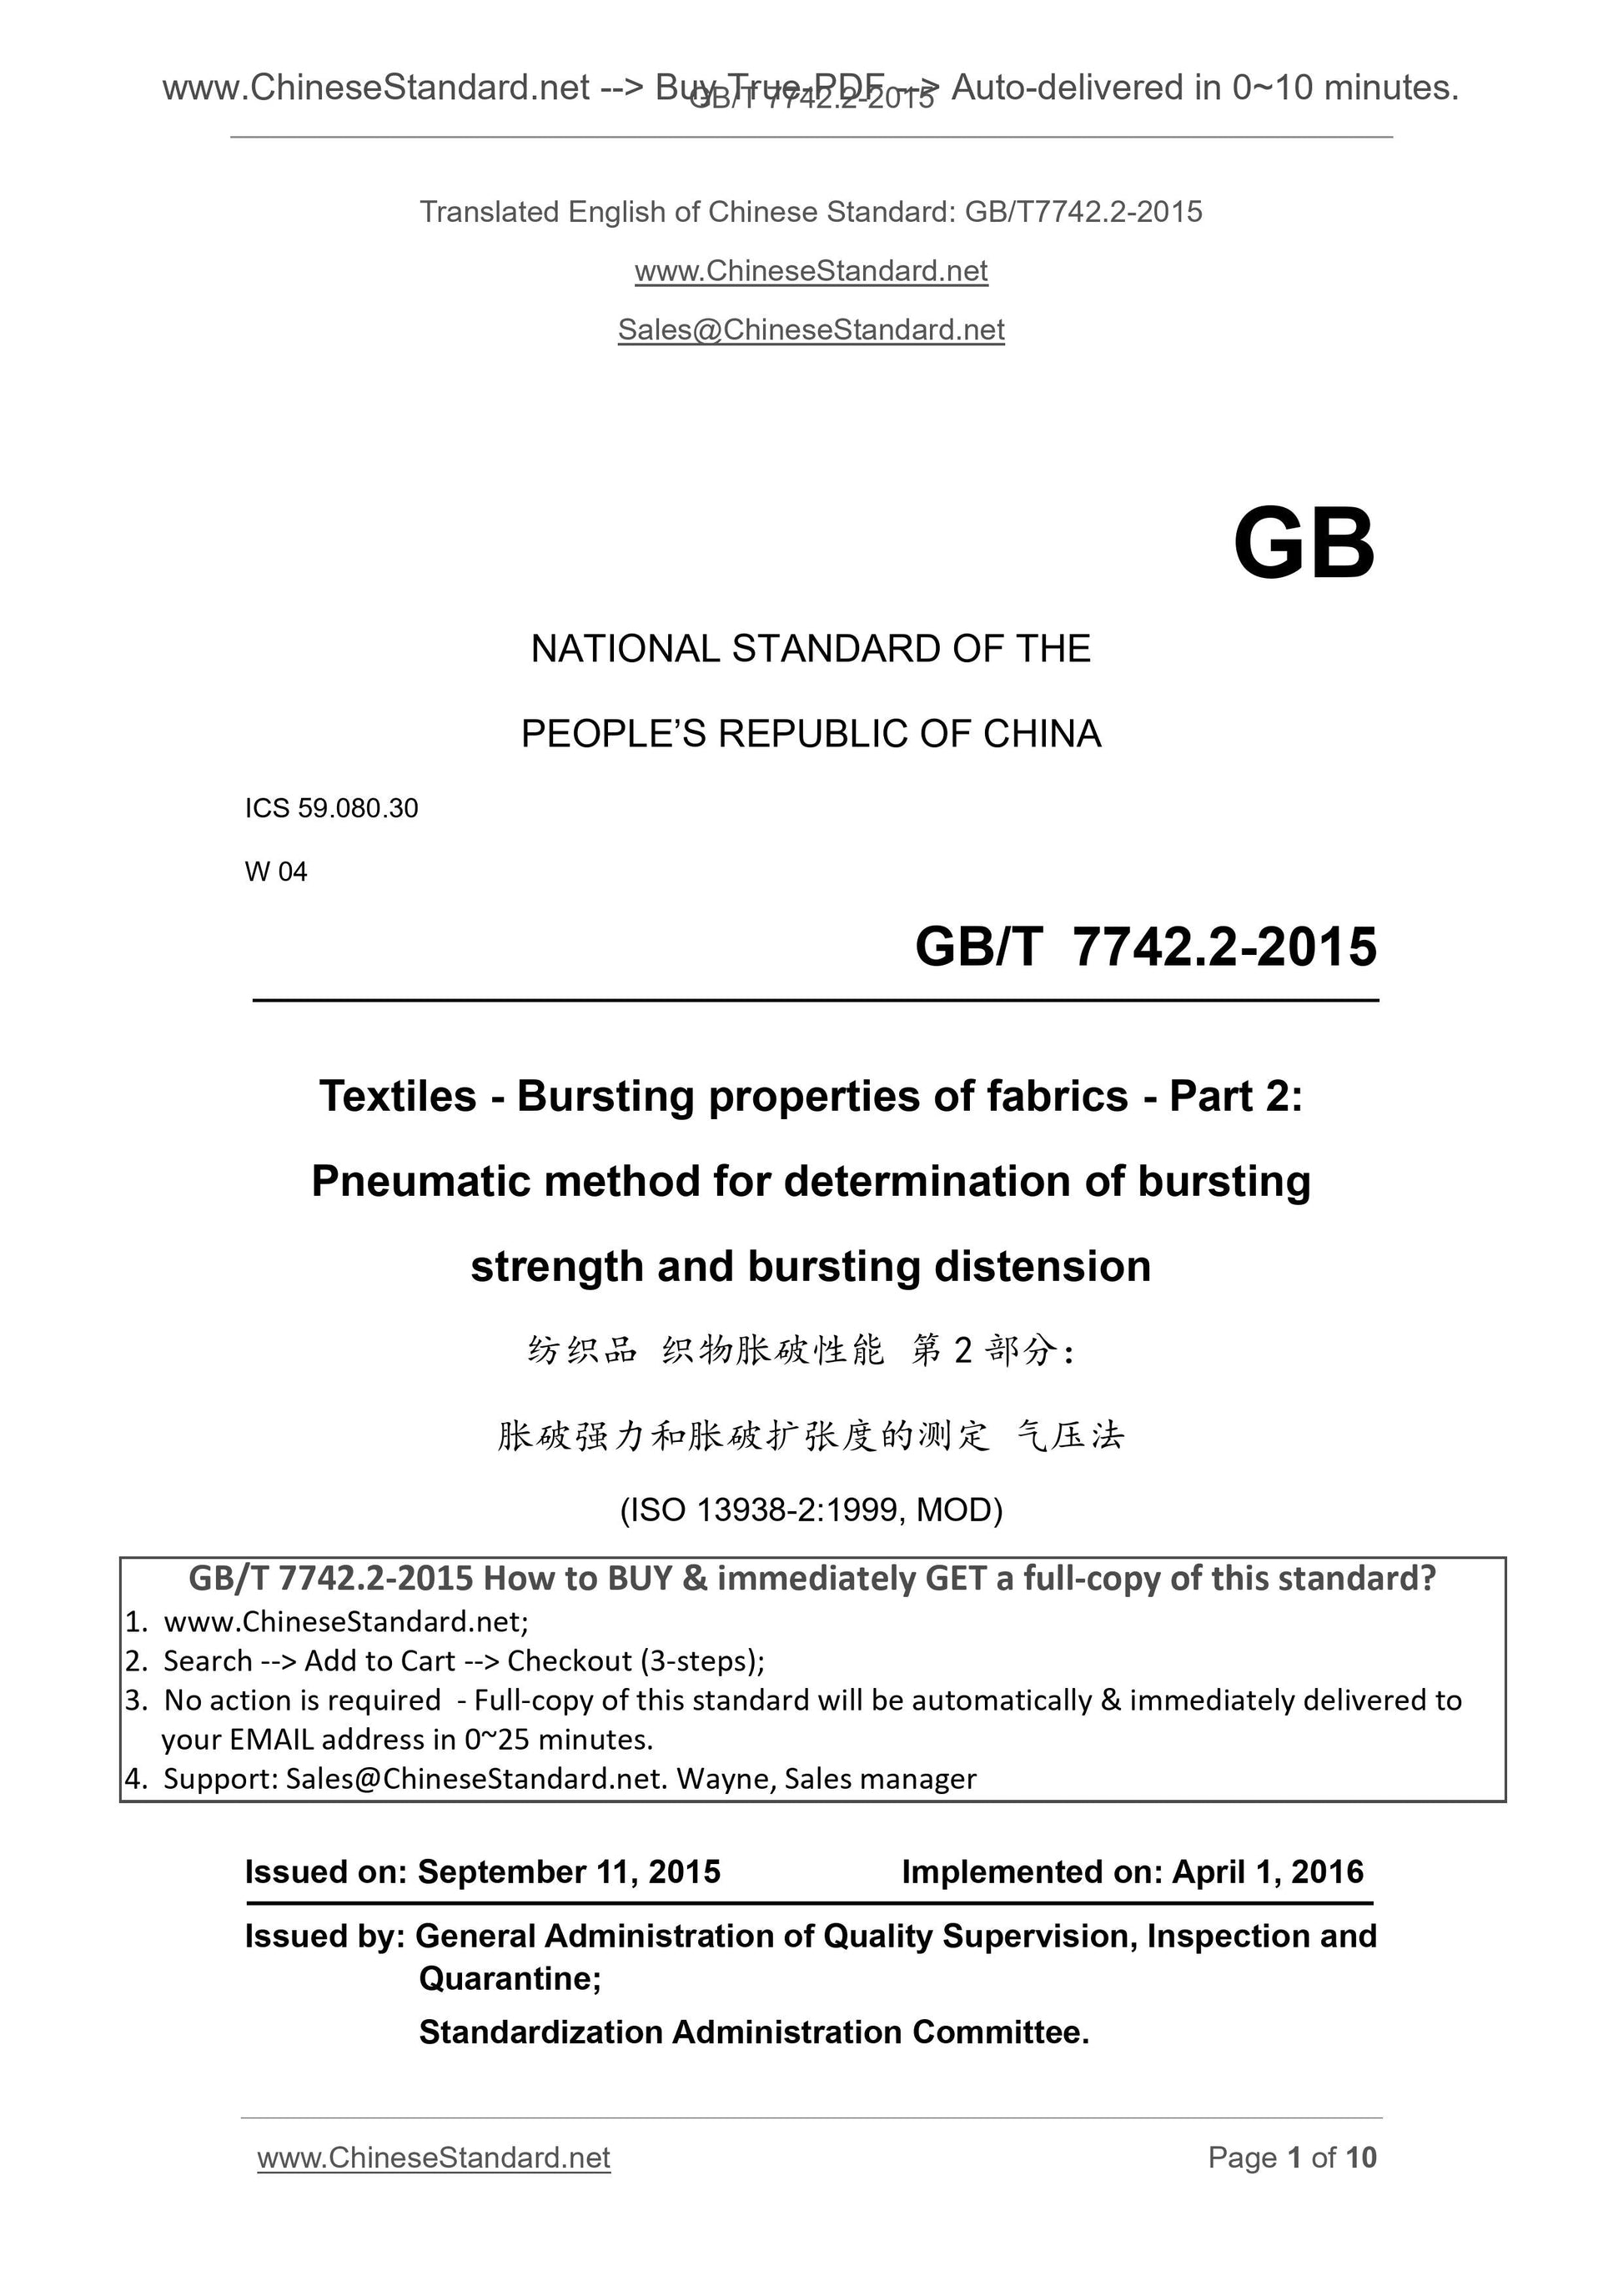 GB/T 7742.2-2015 Page 1